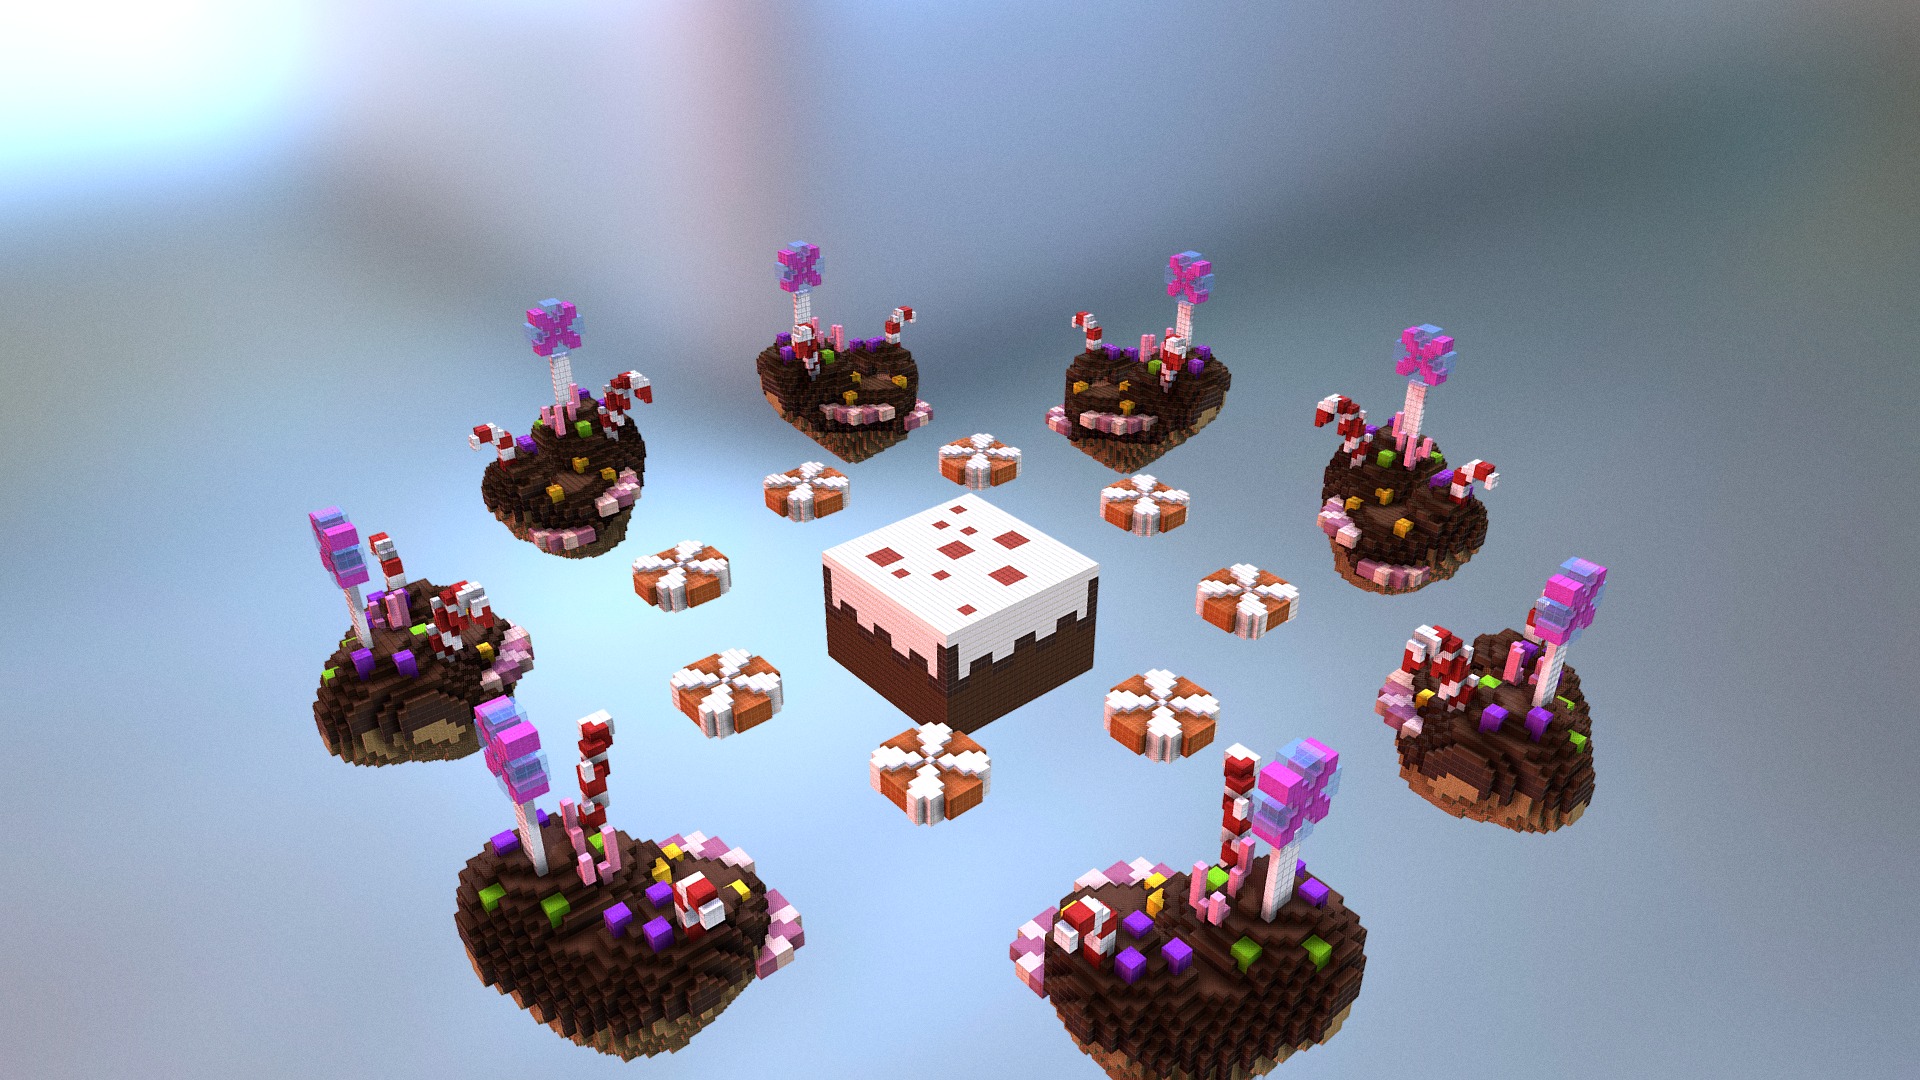 3D model CandyWarTeam&SoloSkywars - This is a 3D model of the CandyWarTeam&SoloSkywars. The 3D model is about a group of cupcakes with decorations.